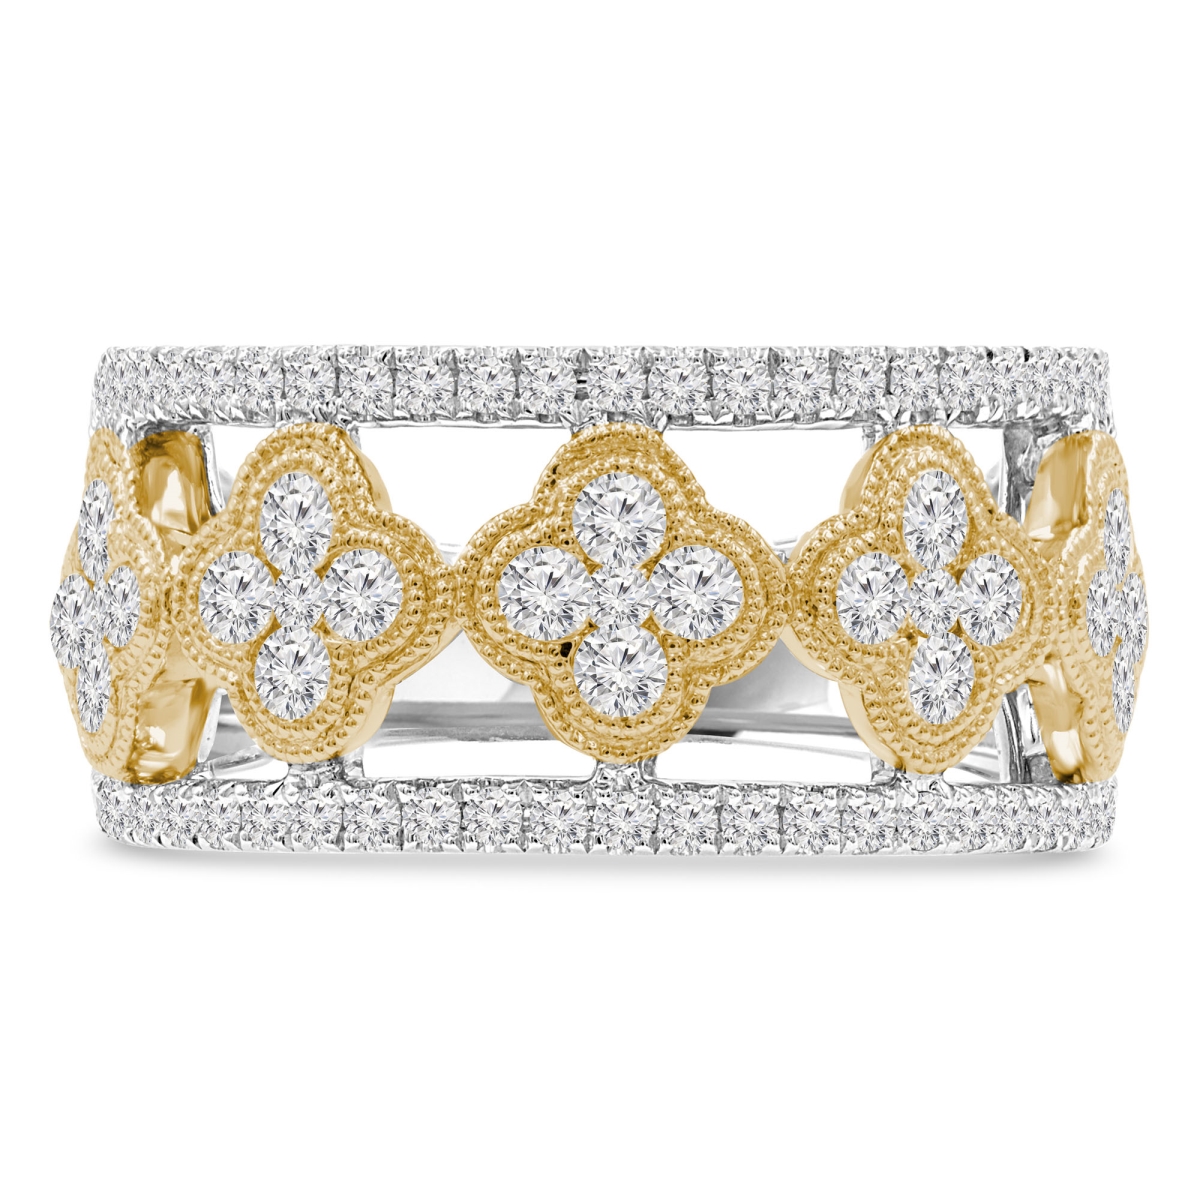 Picture of Majesty Diamonds MDR210140-4 1 CTW Round Diamond Cocktail Ring in 14K Two-Tone Gold - Size 4